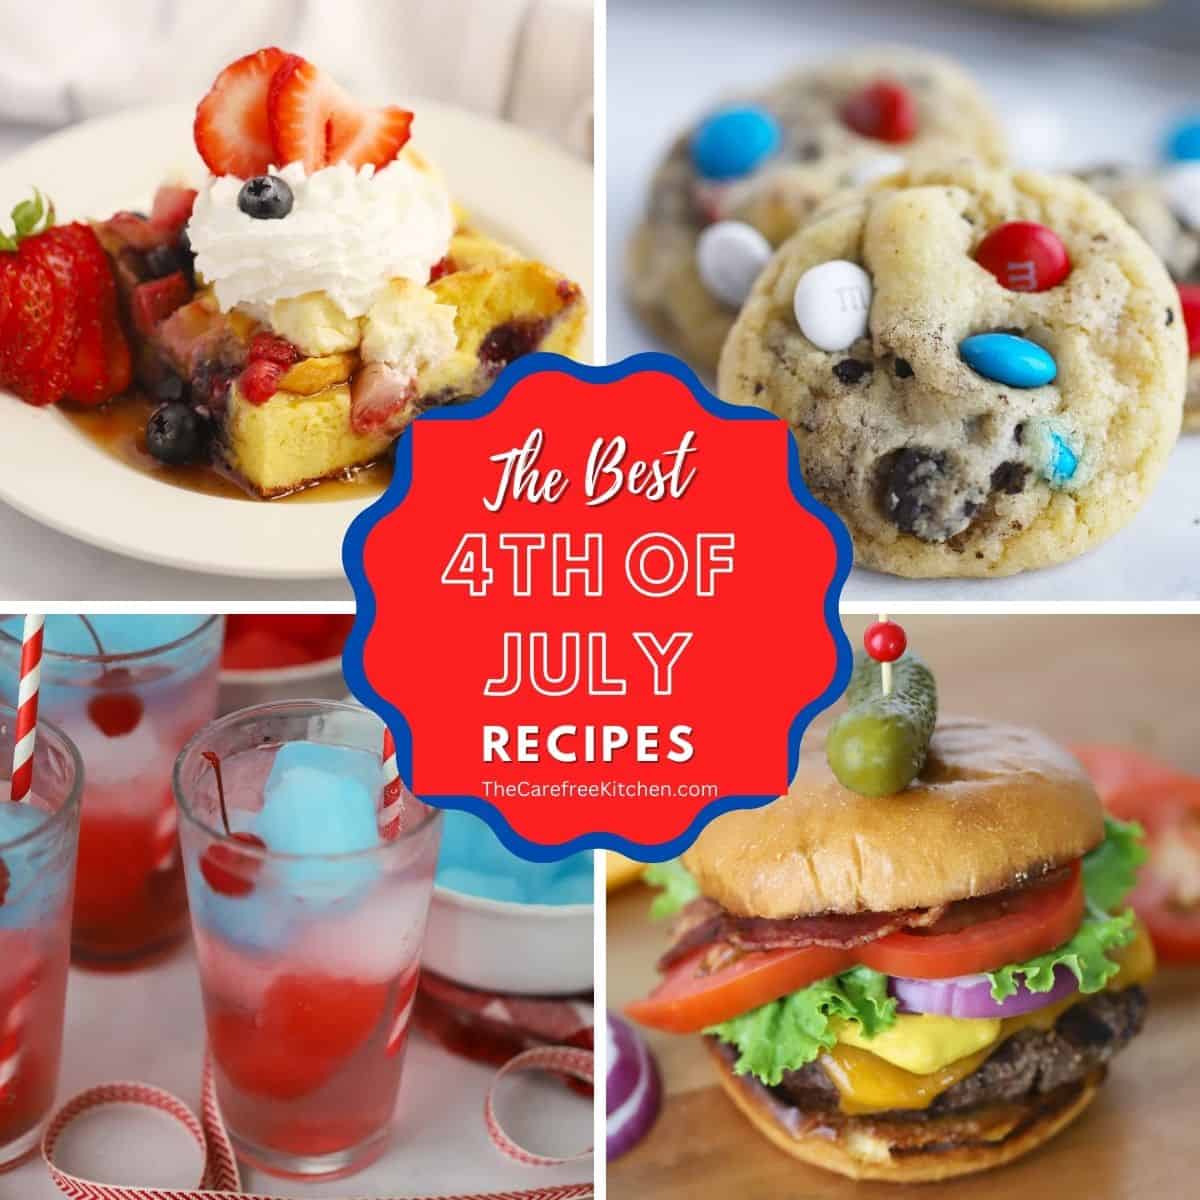 best 4th of July recipes, menu ideas. red white and blue recipes, bbq recipes, bbq side dishes to take to a potluck.